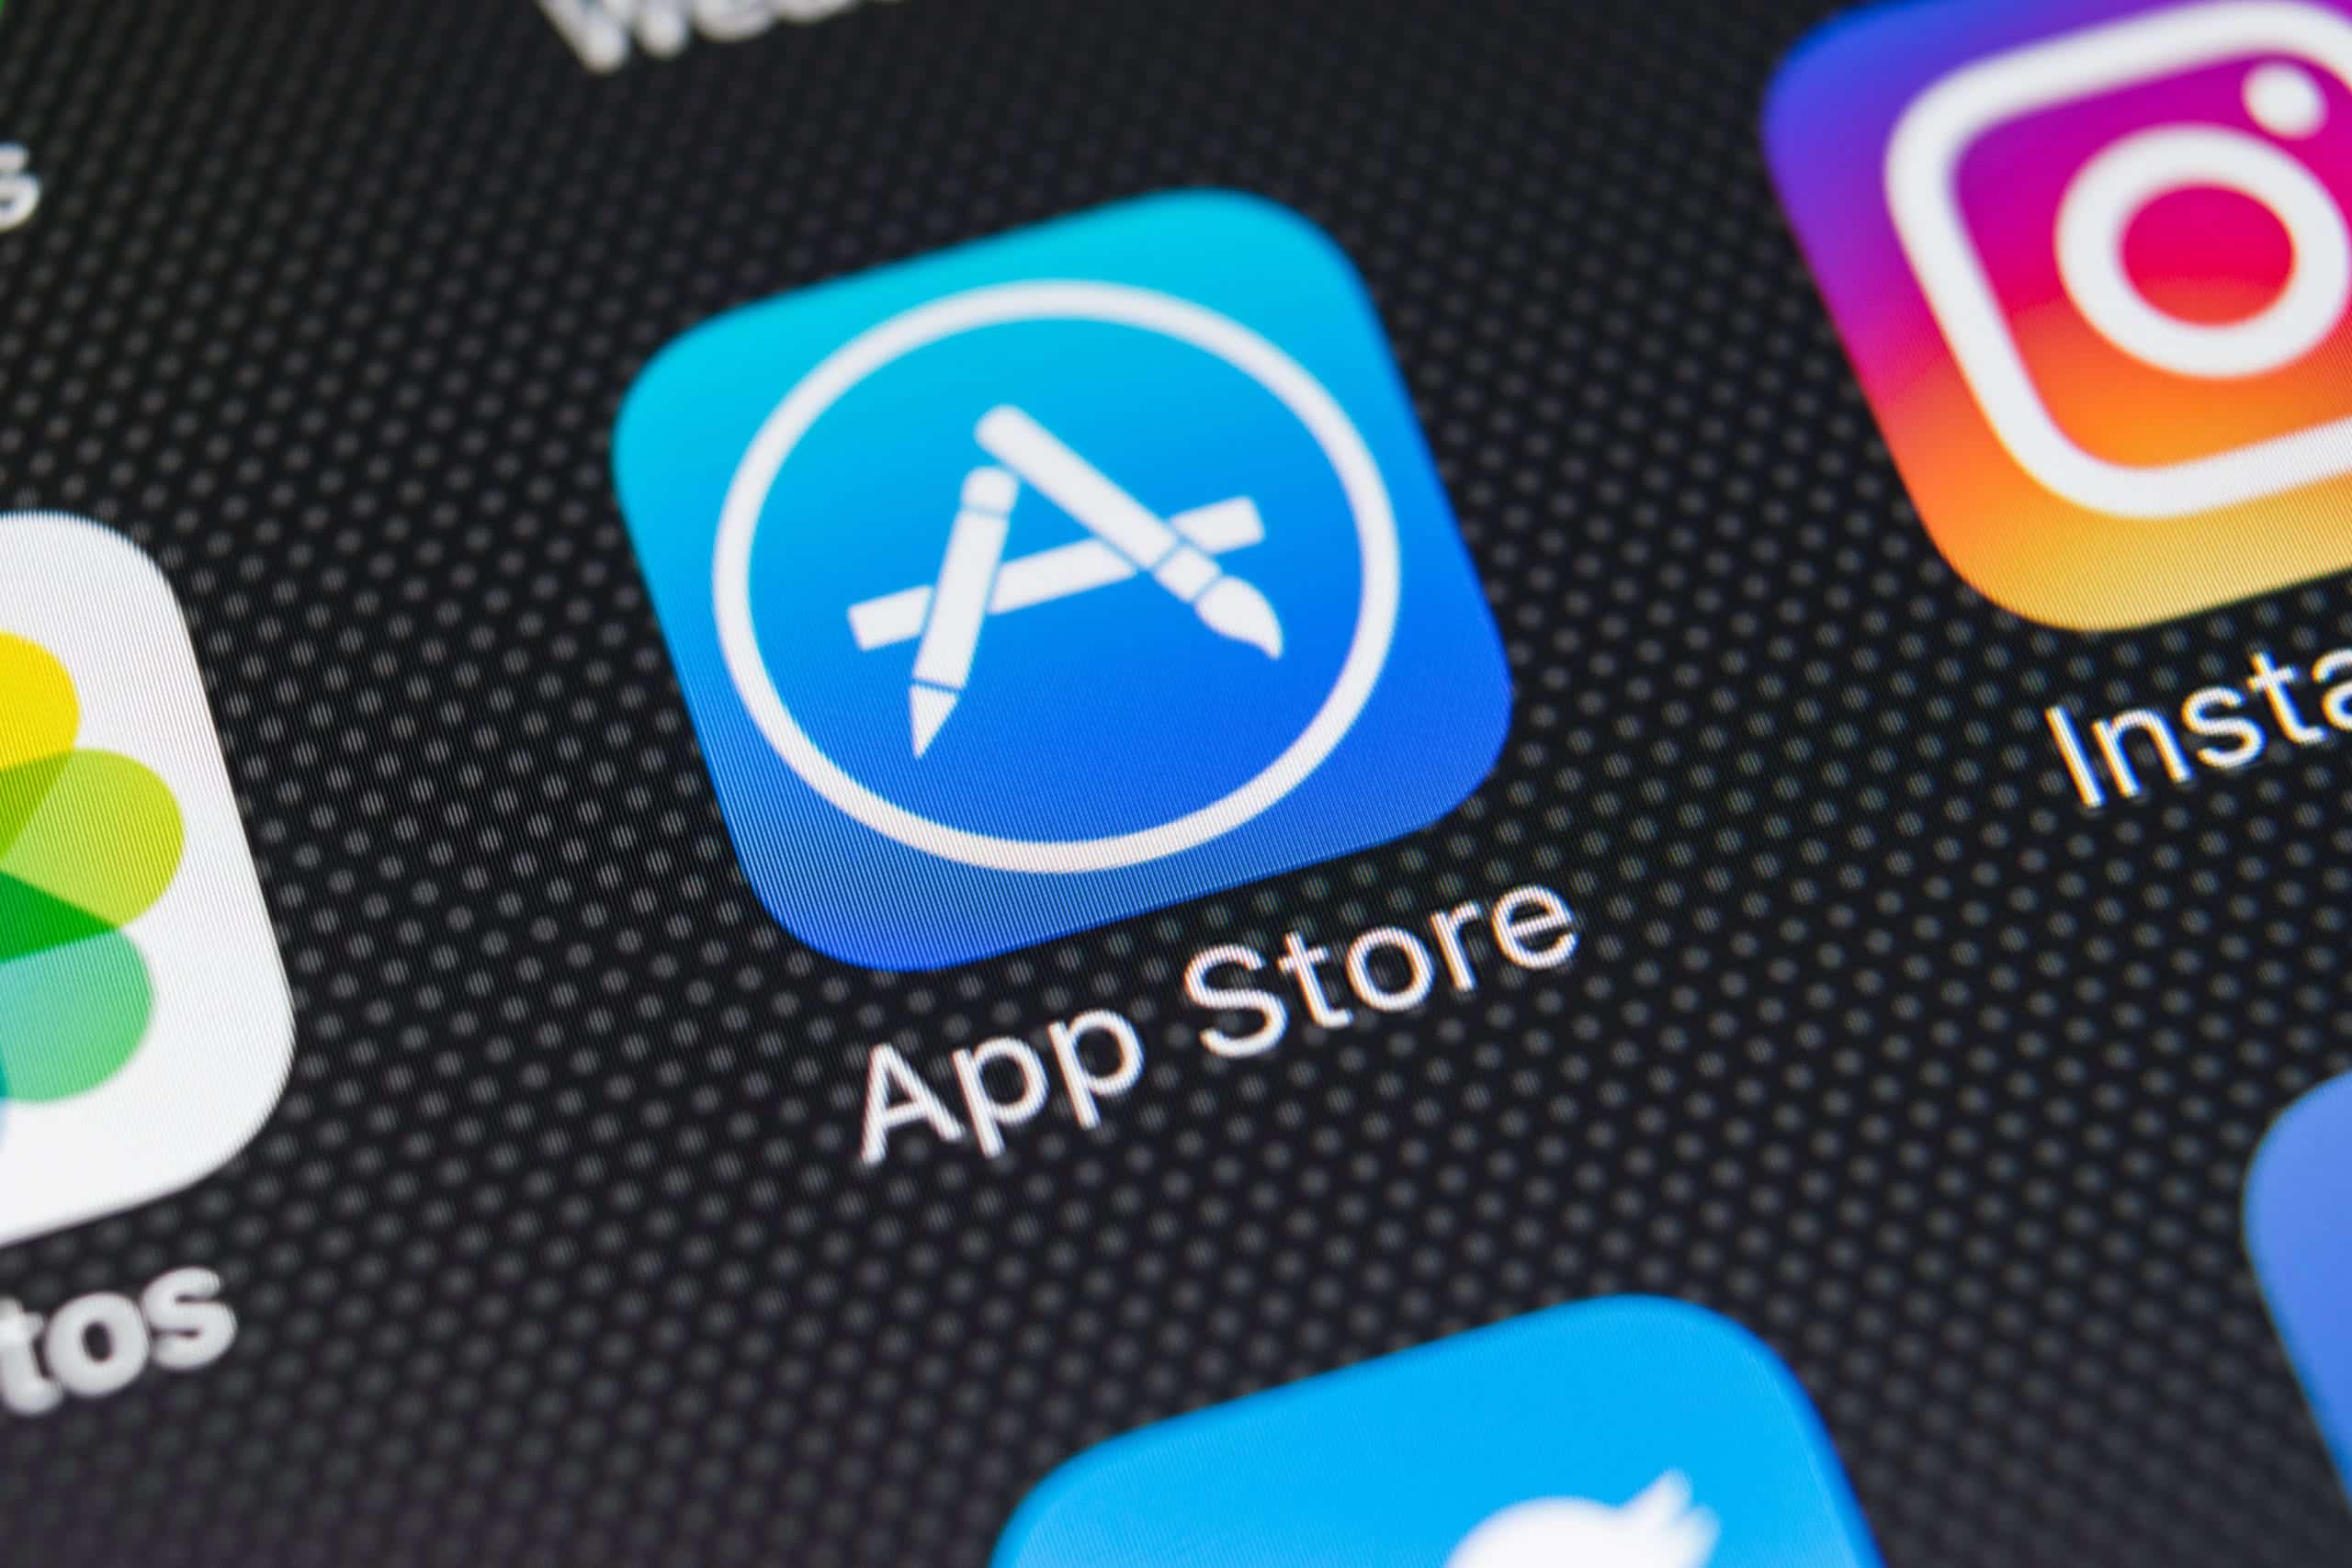 Apple Updates its App Store Review Guidelines, Aimed at Improving User Experience